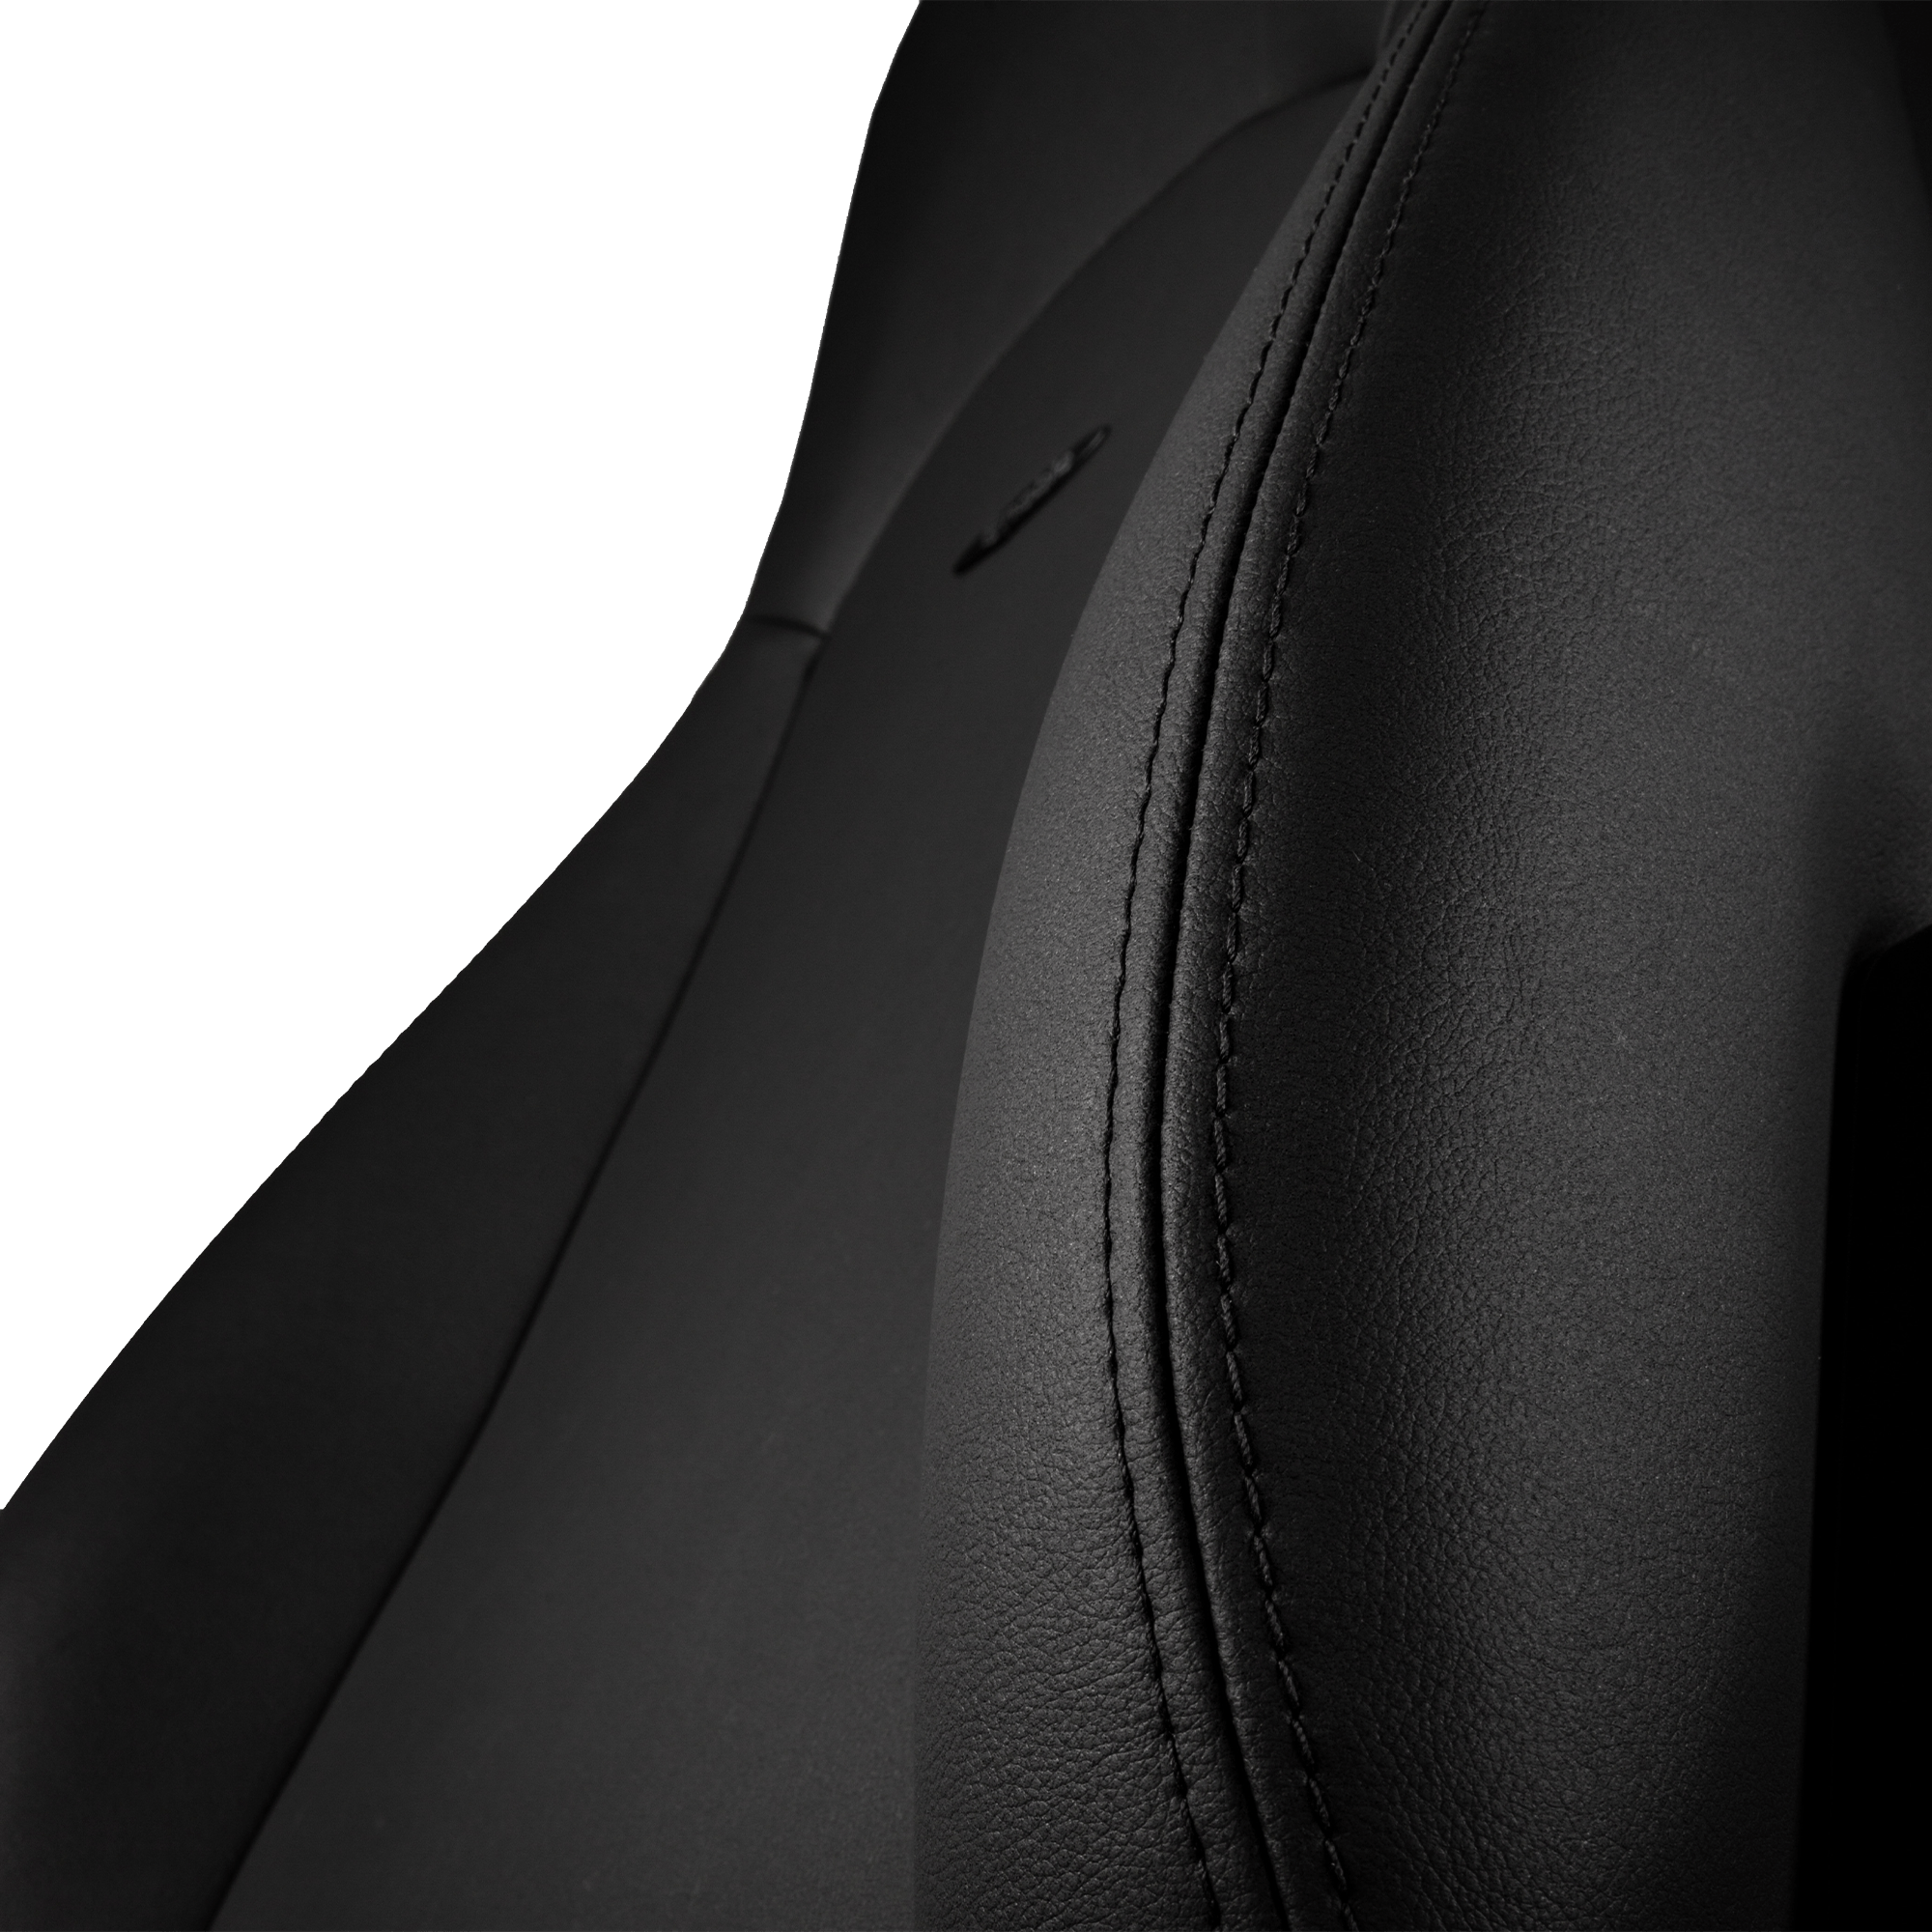 Noblechairs - ICON Black Edition